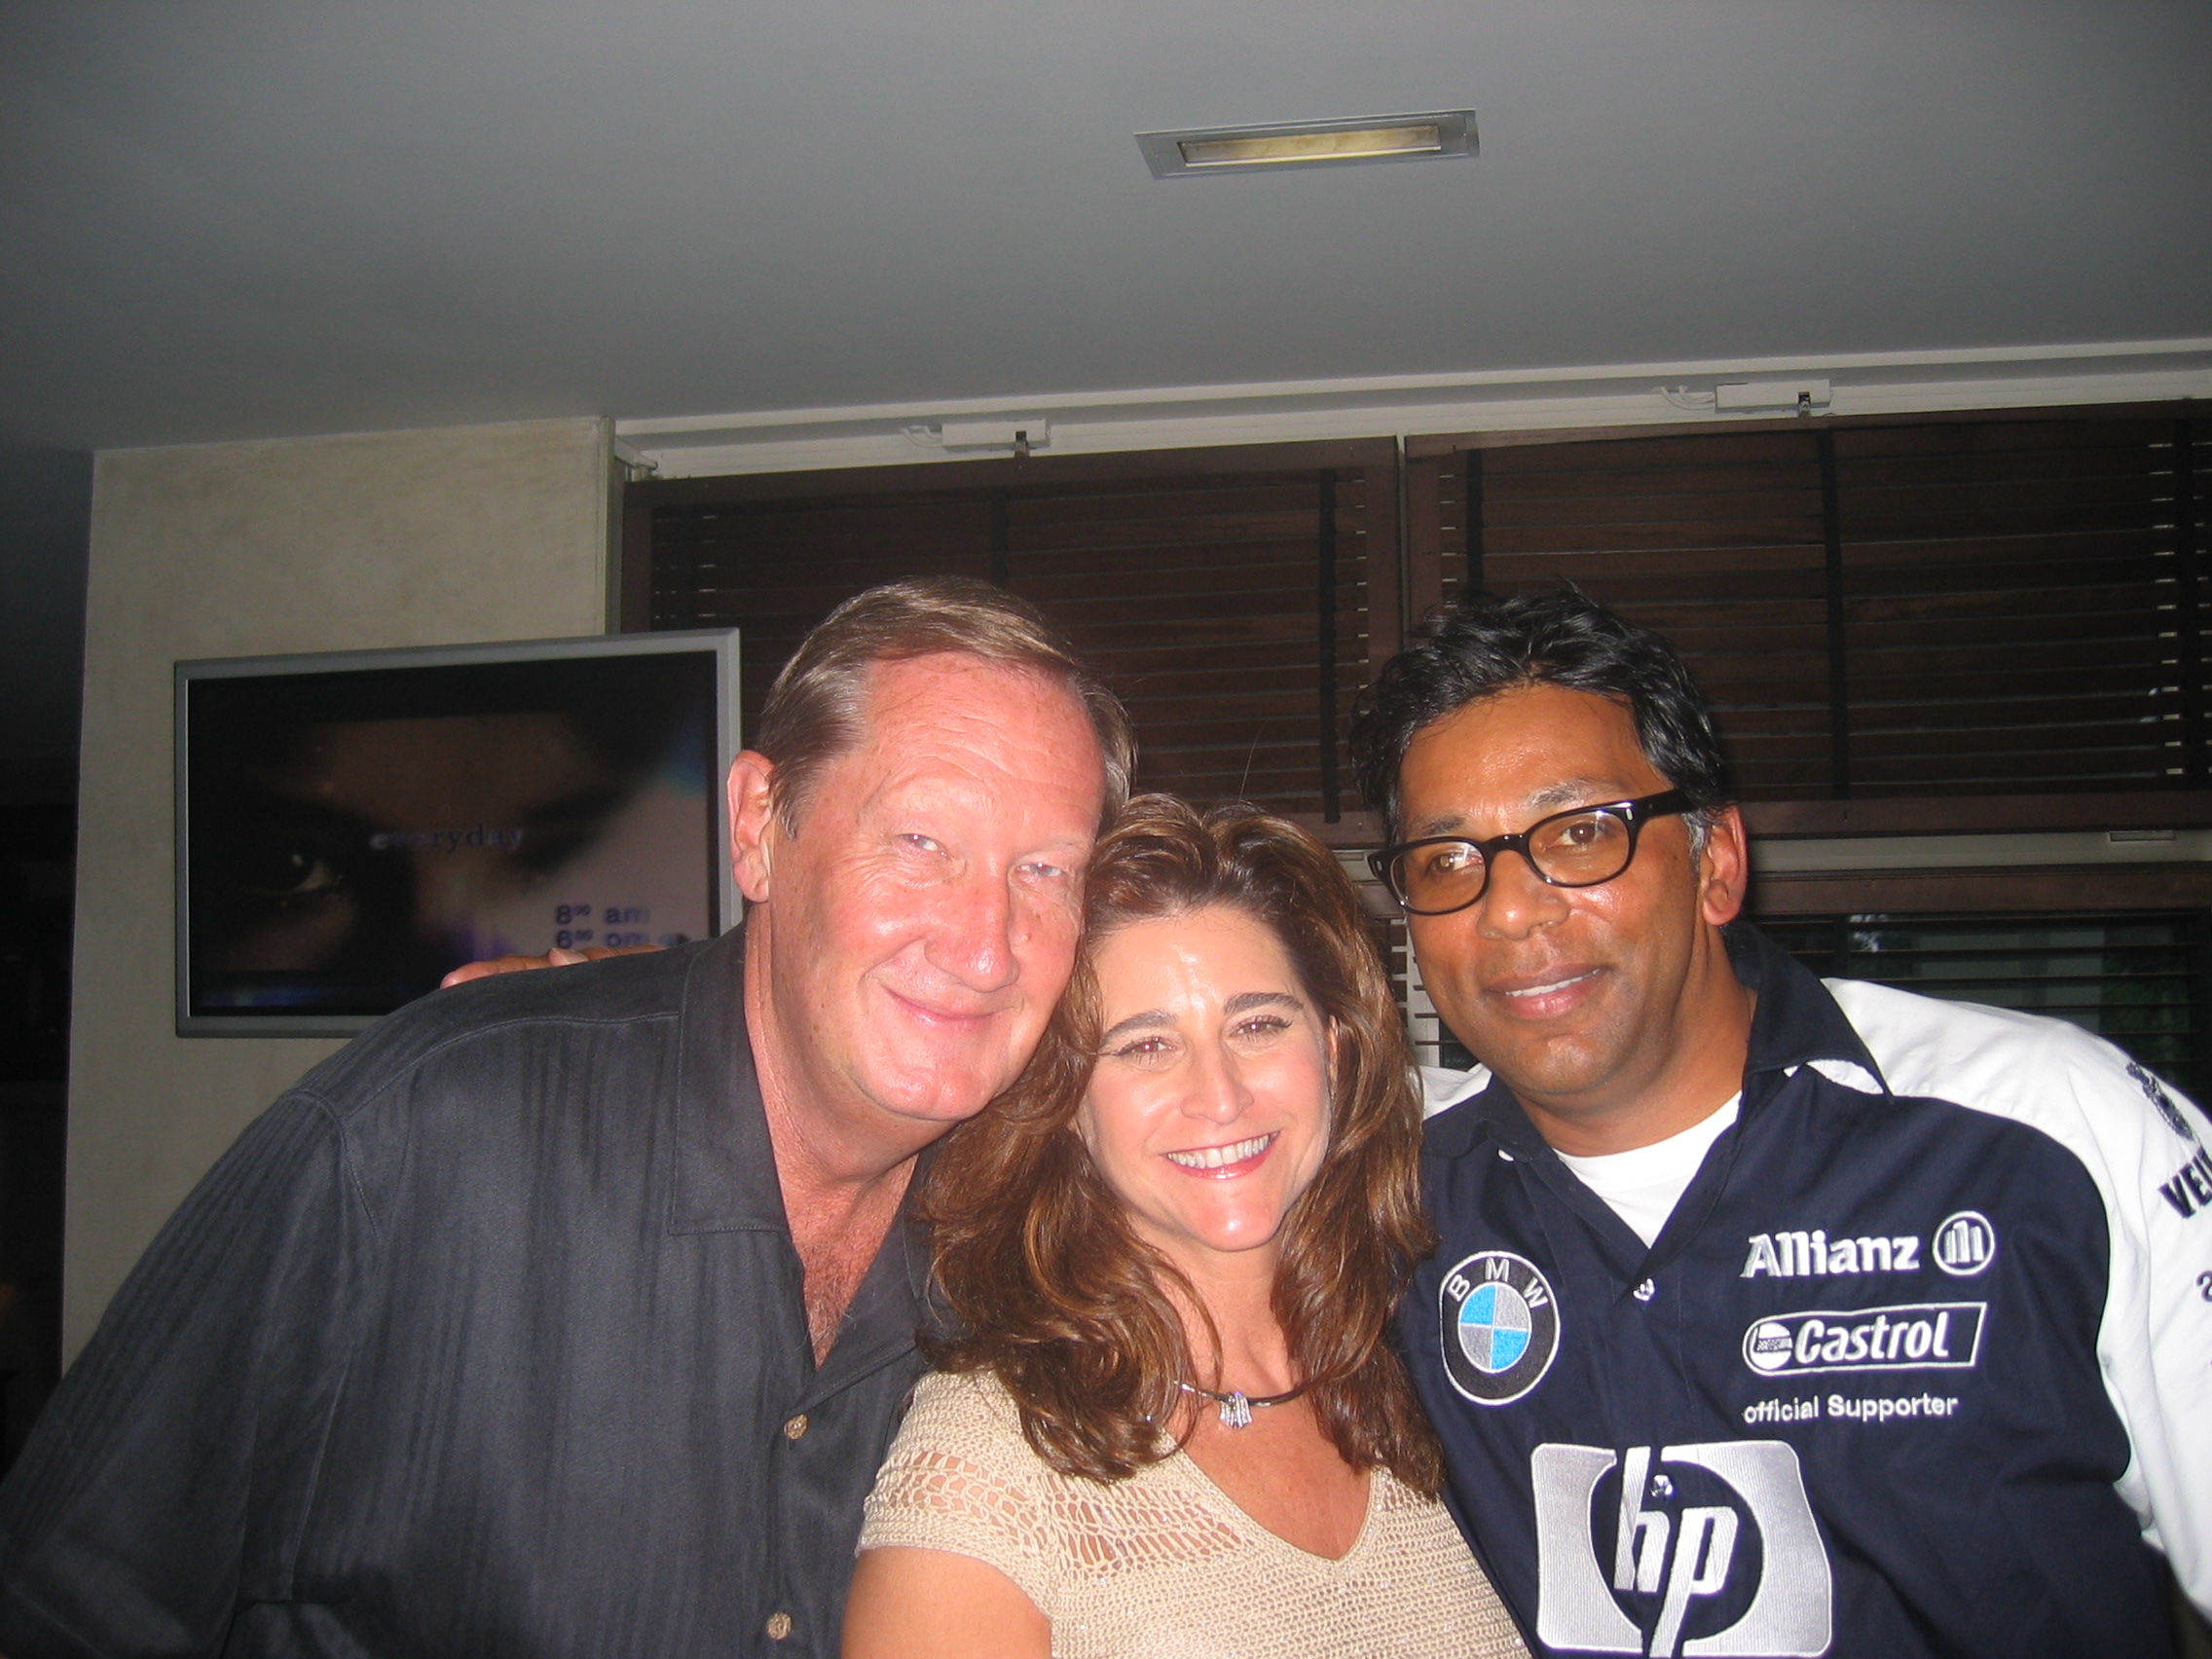 Timothy Hollywood Khan with Peter Crooke in Monaco after the win by Juan Pablo Montoya at Monaco Grand Prix